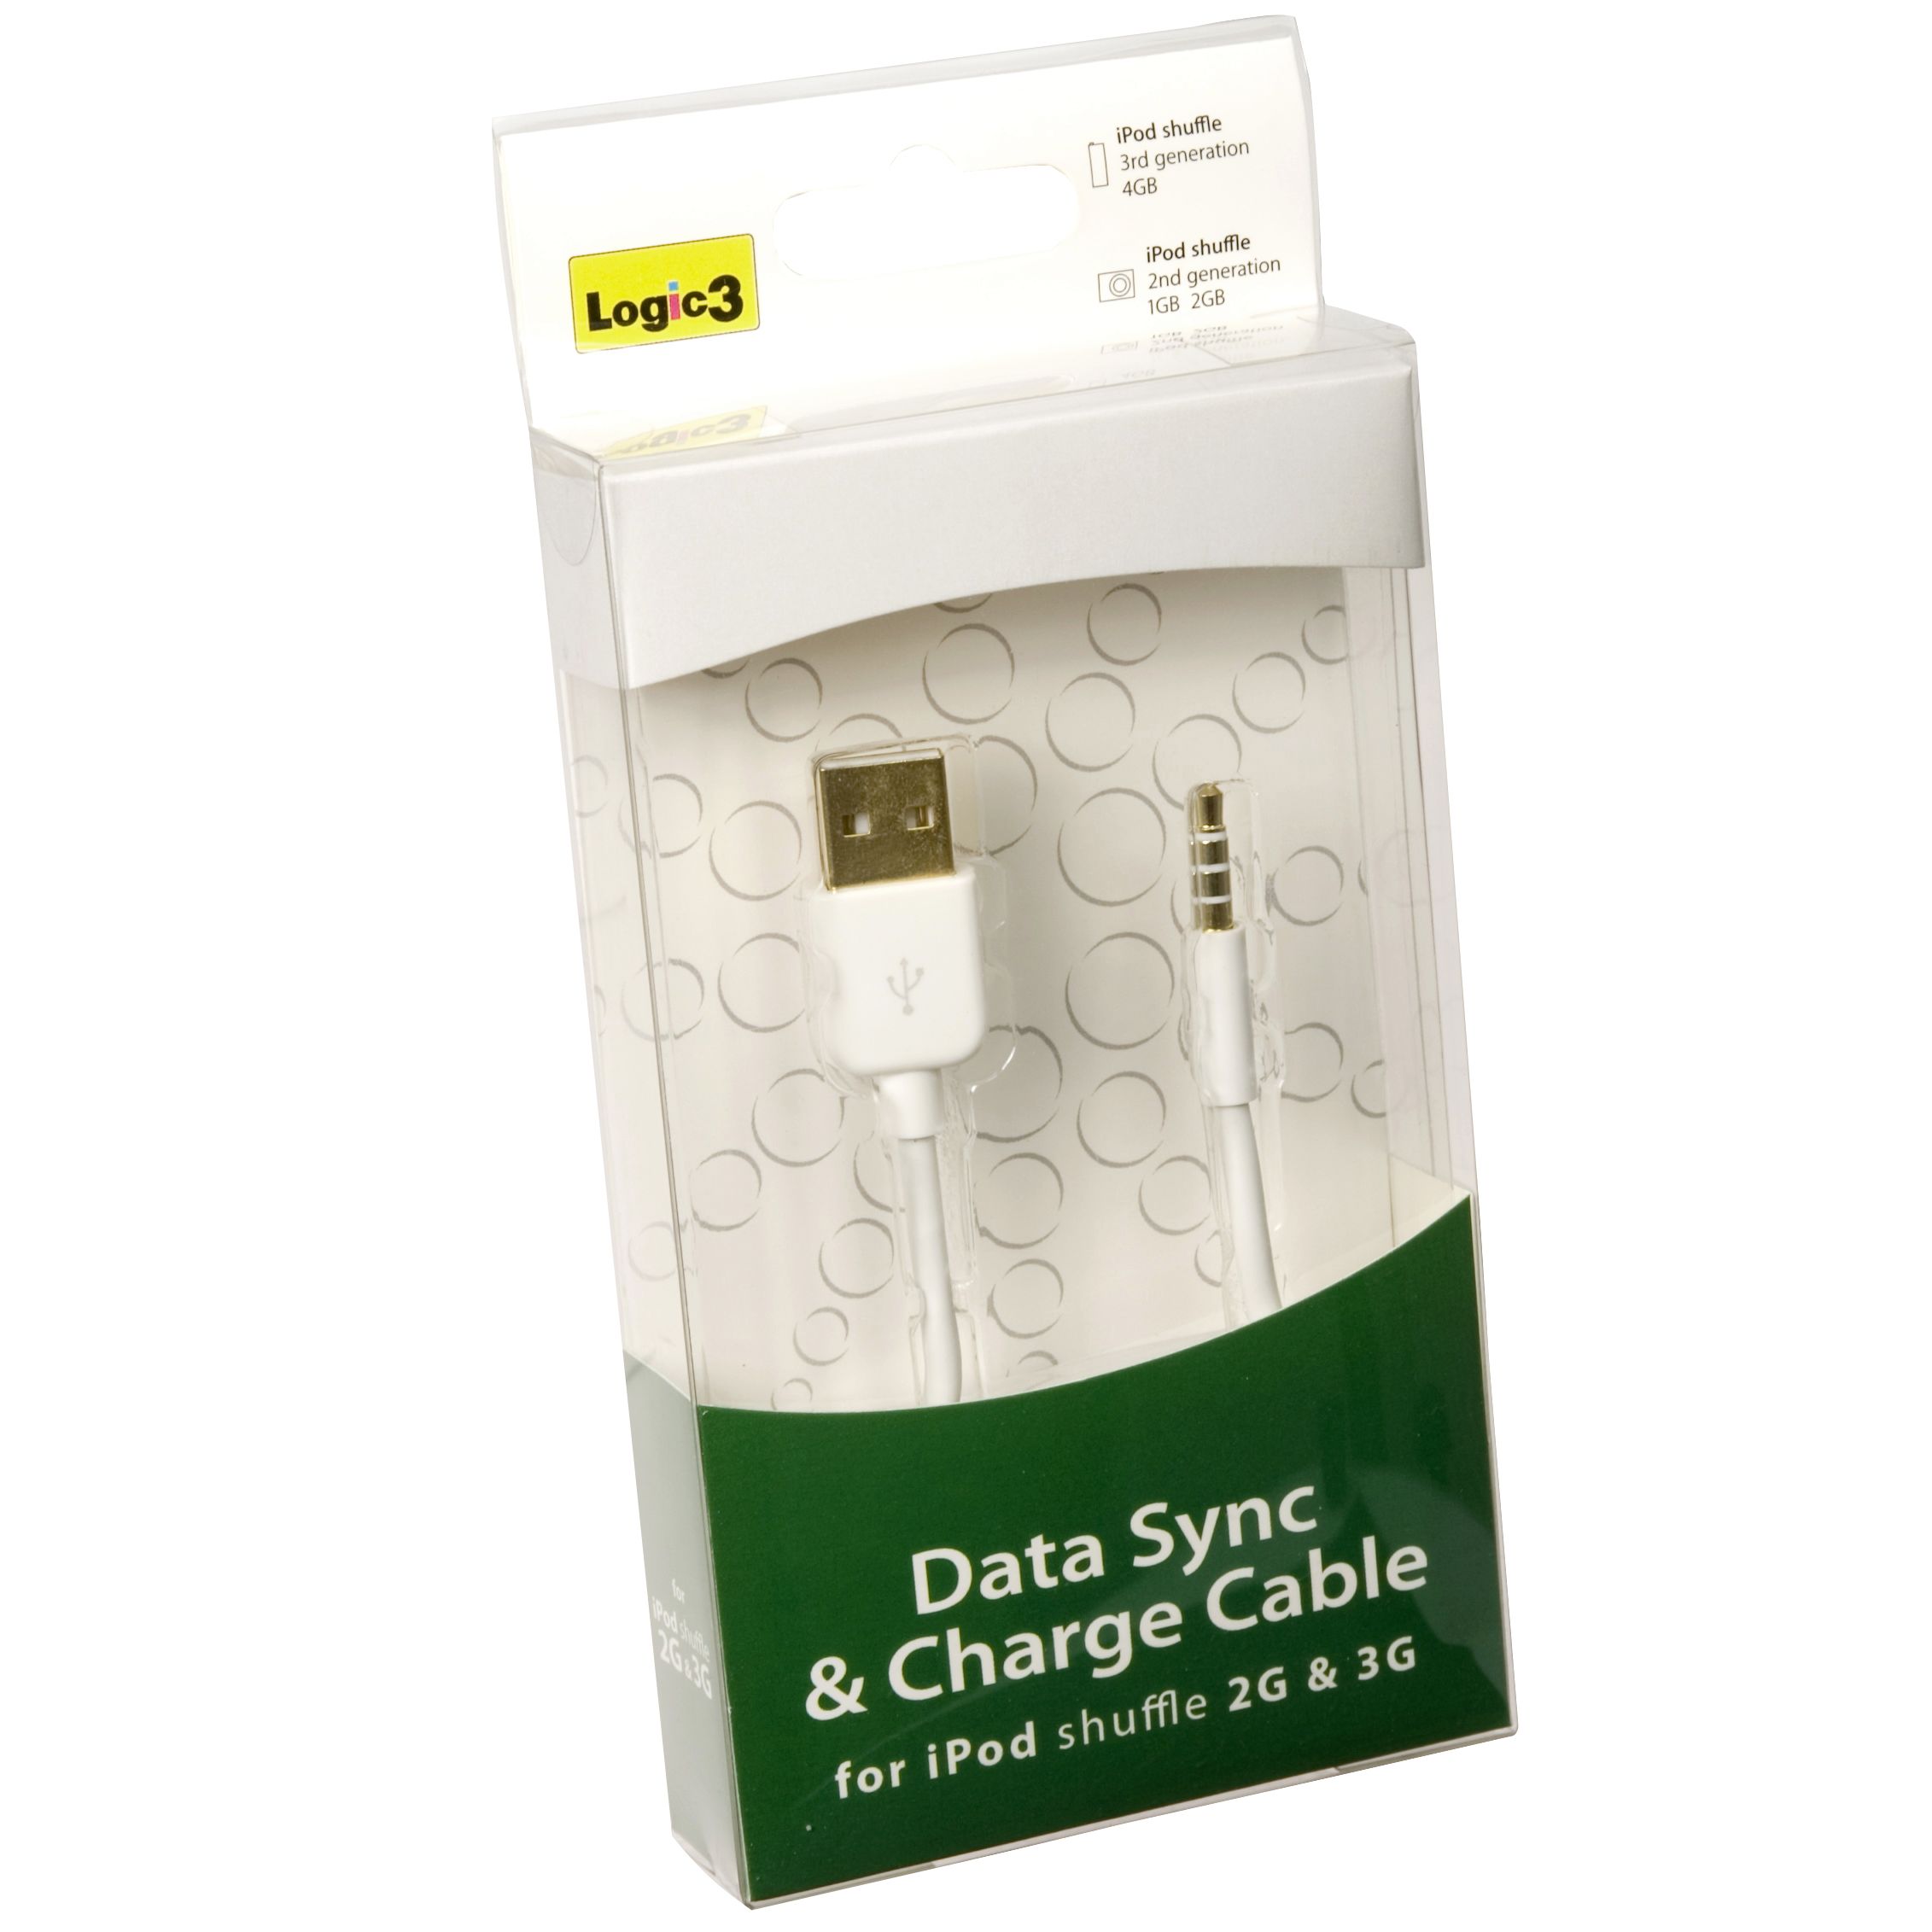 logic 3 Data Sync and Charge Cable (IP051)